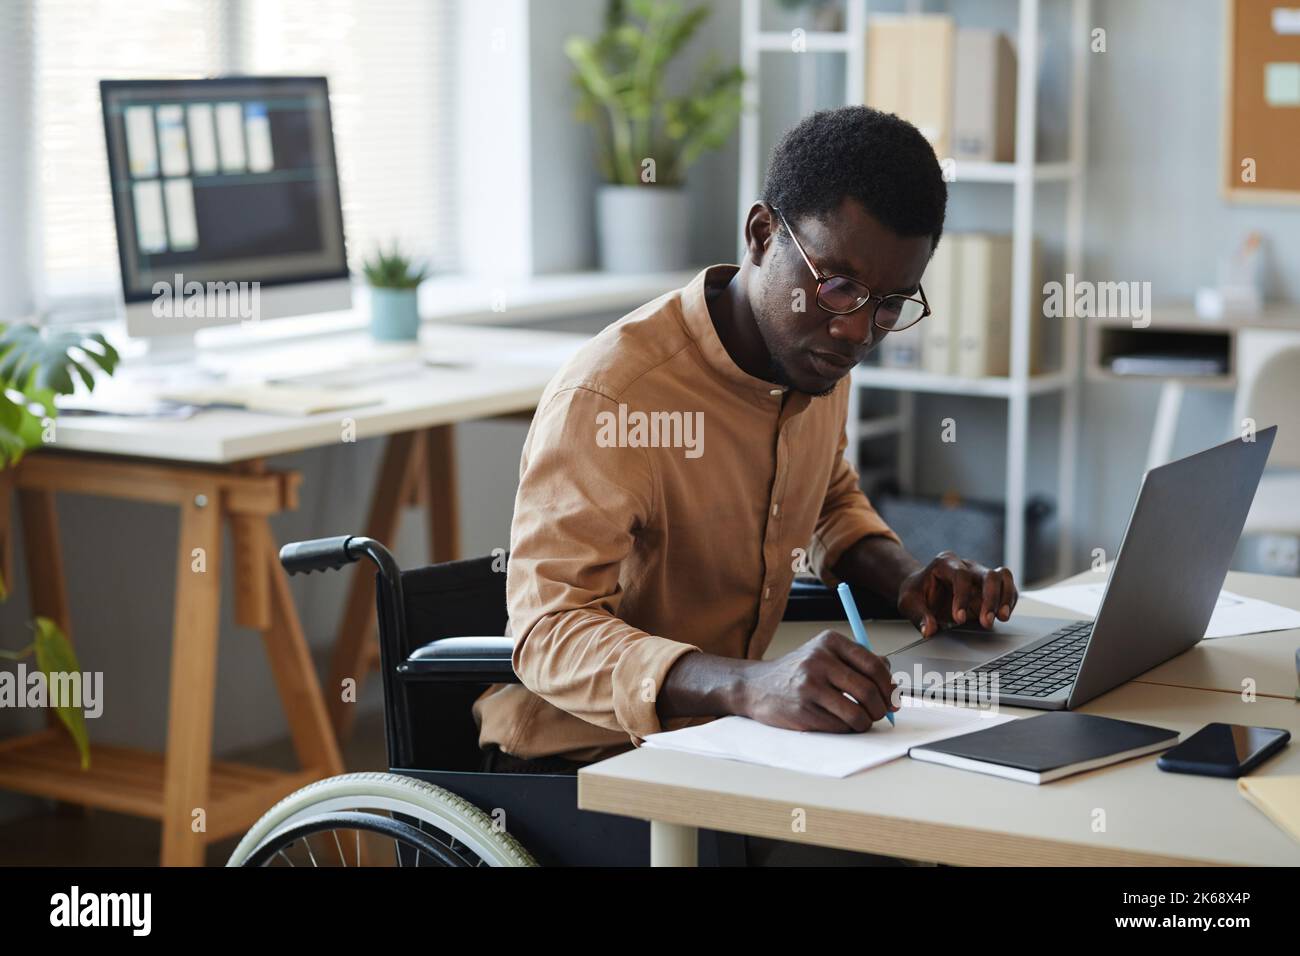 Portrait of black young man with disability working in office and using laptop, accessible workplace concept Stock Photo